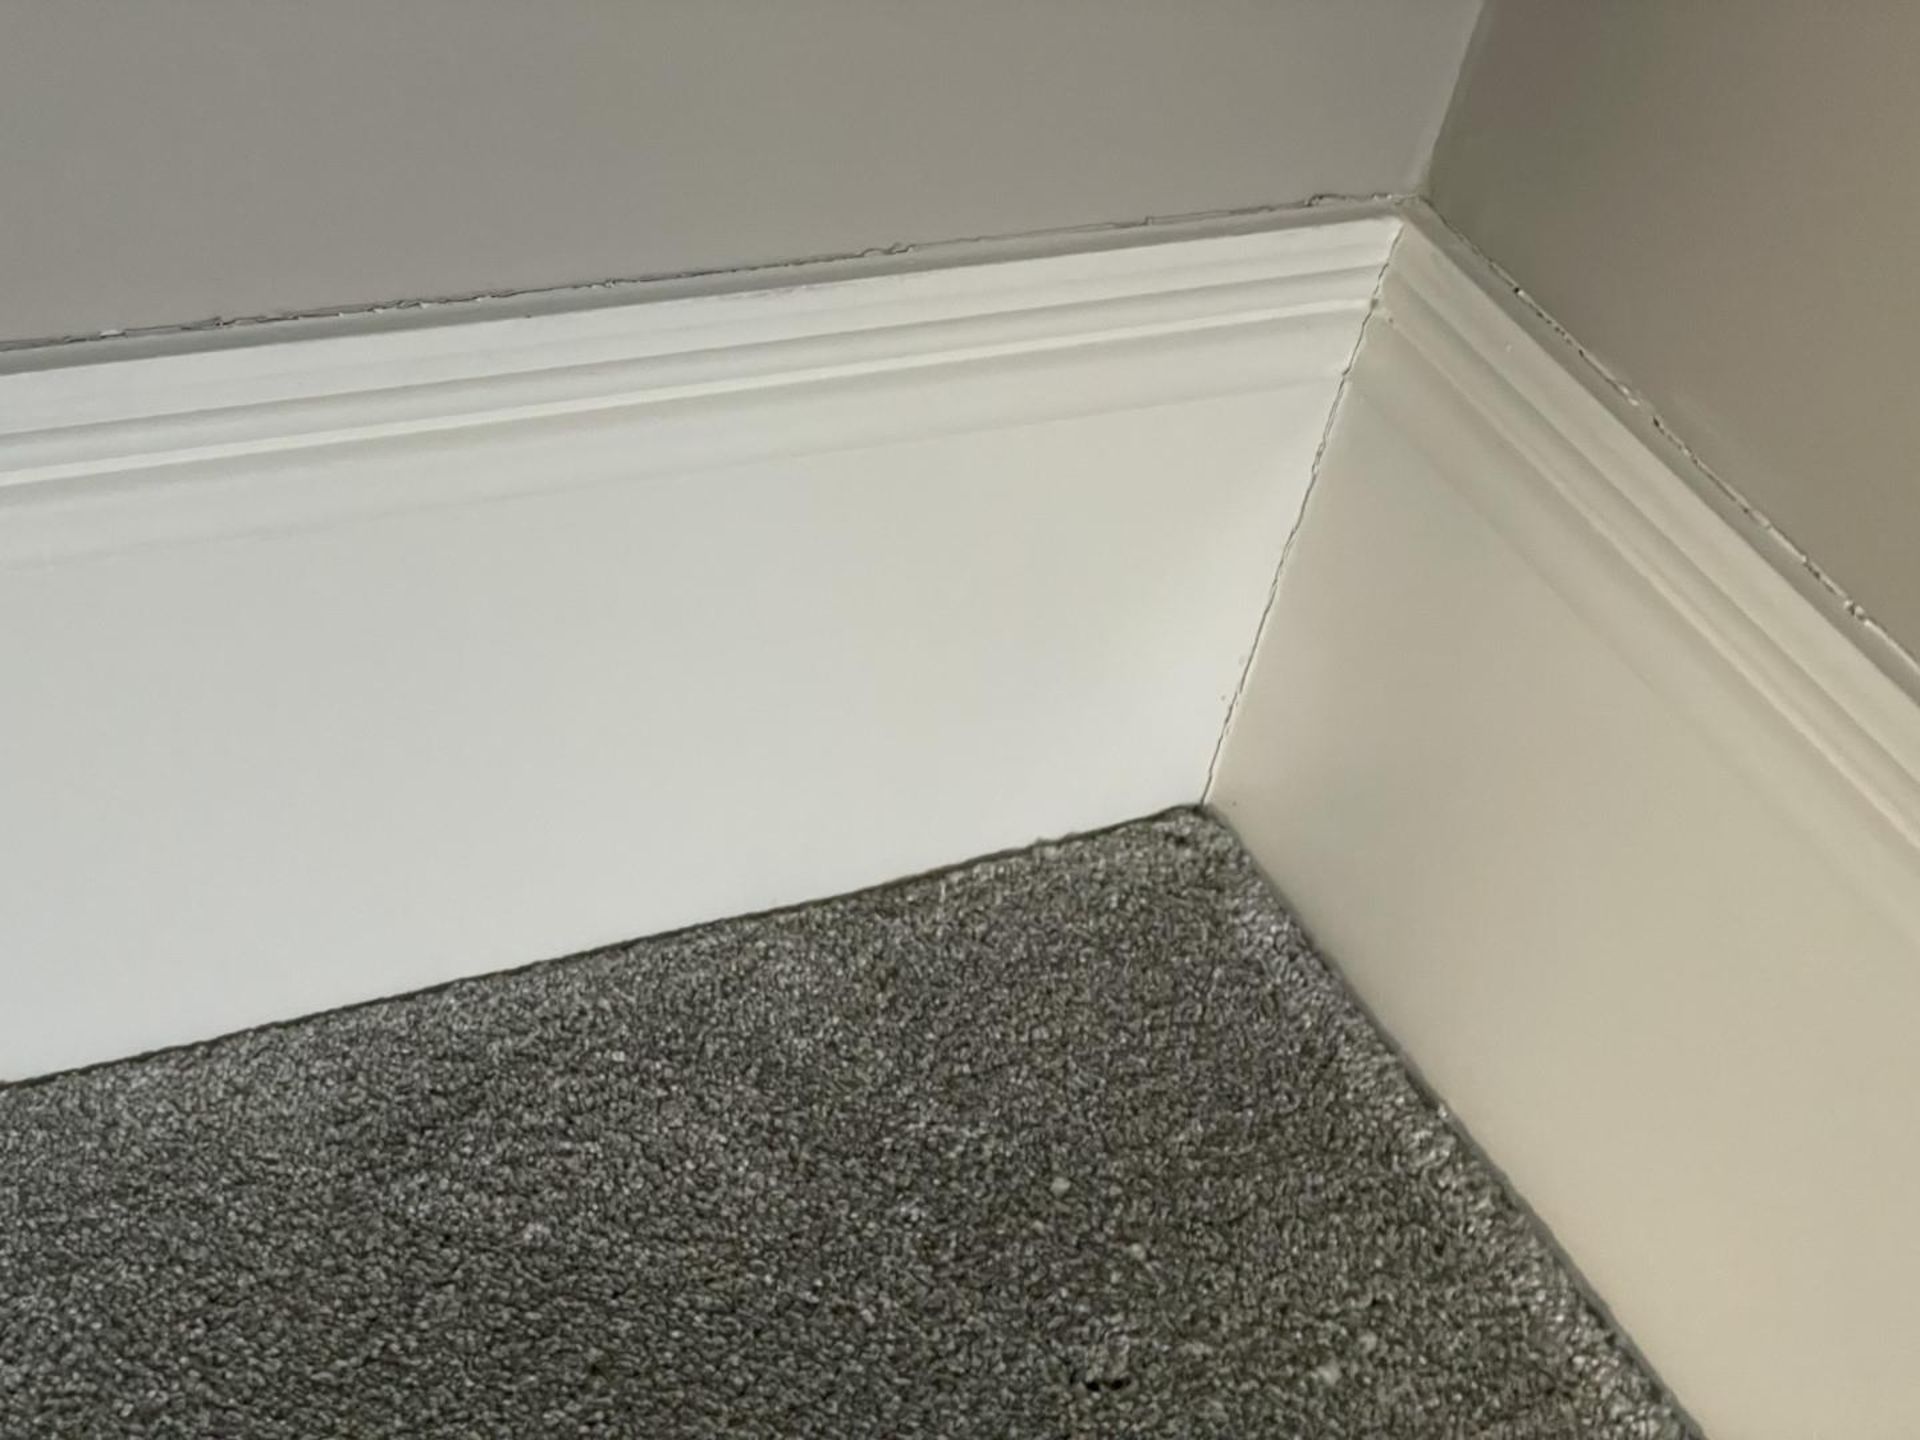 Approximately 10-Metres of Painted Timber Wooden Skirting Boards, In White - Ref: PAN210 - CL896 - - Image 6 of 9